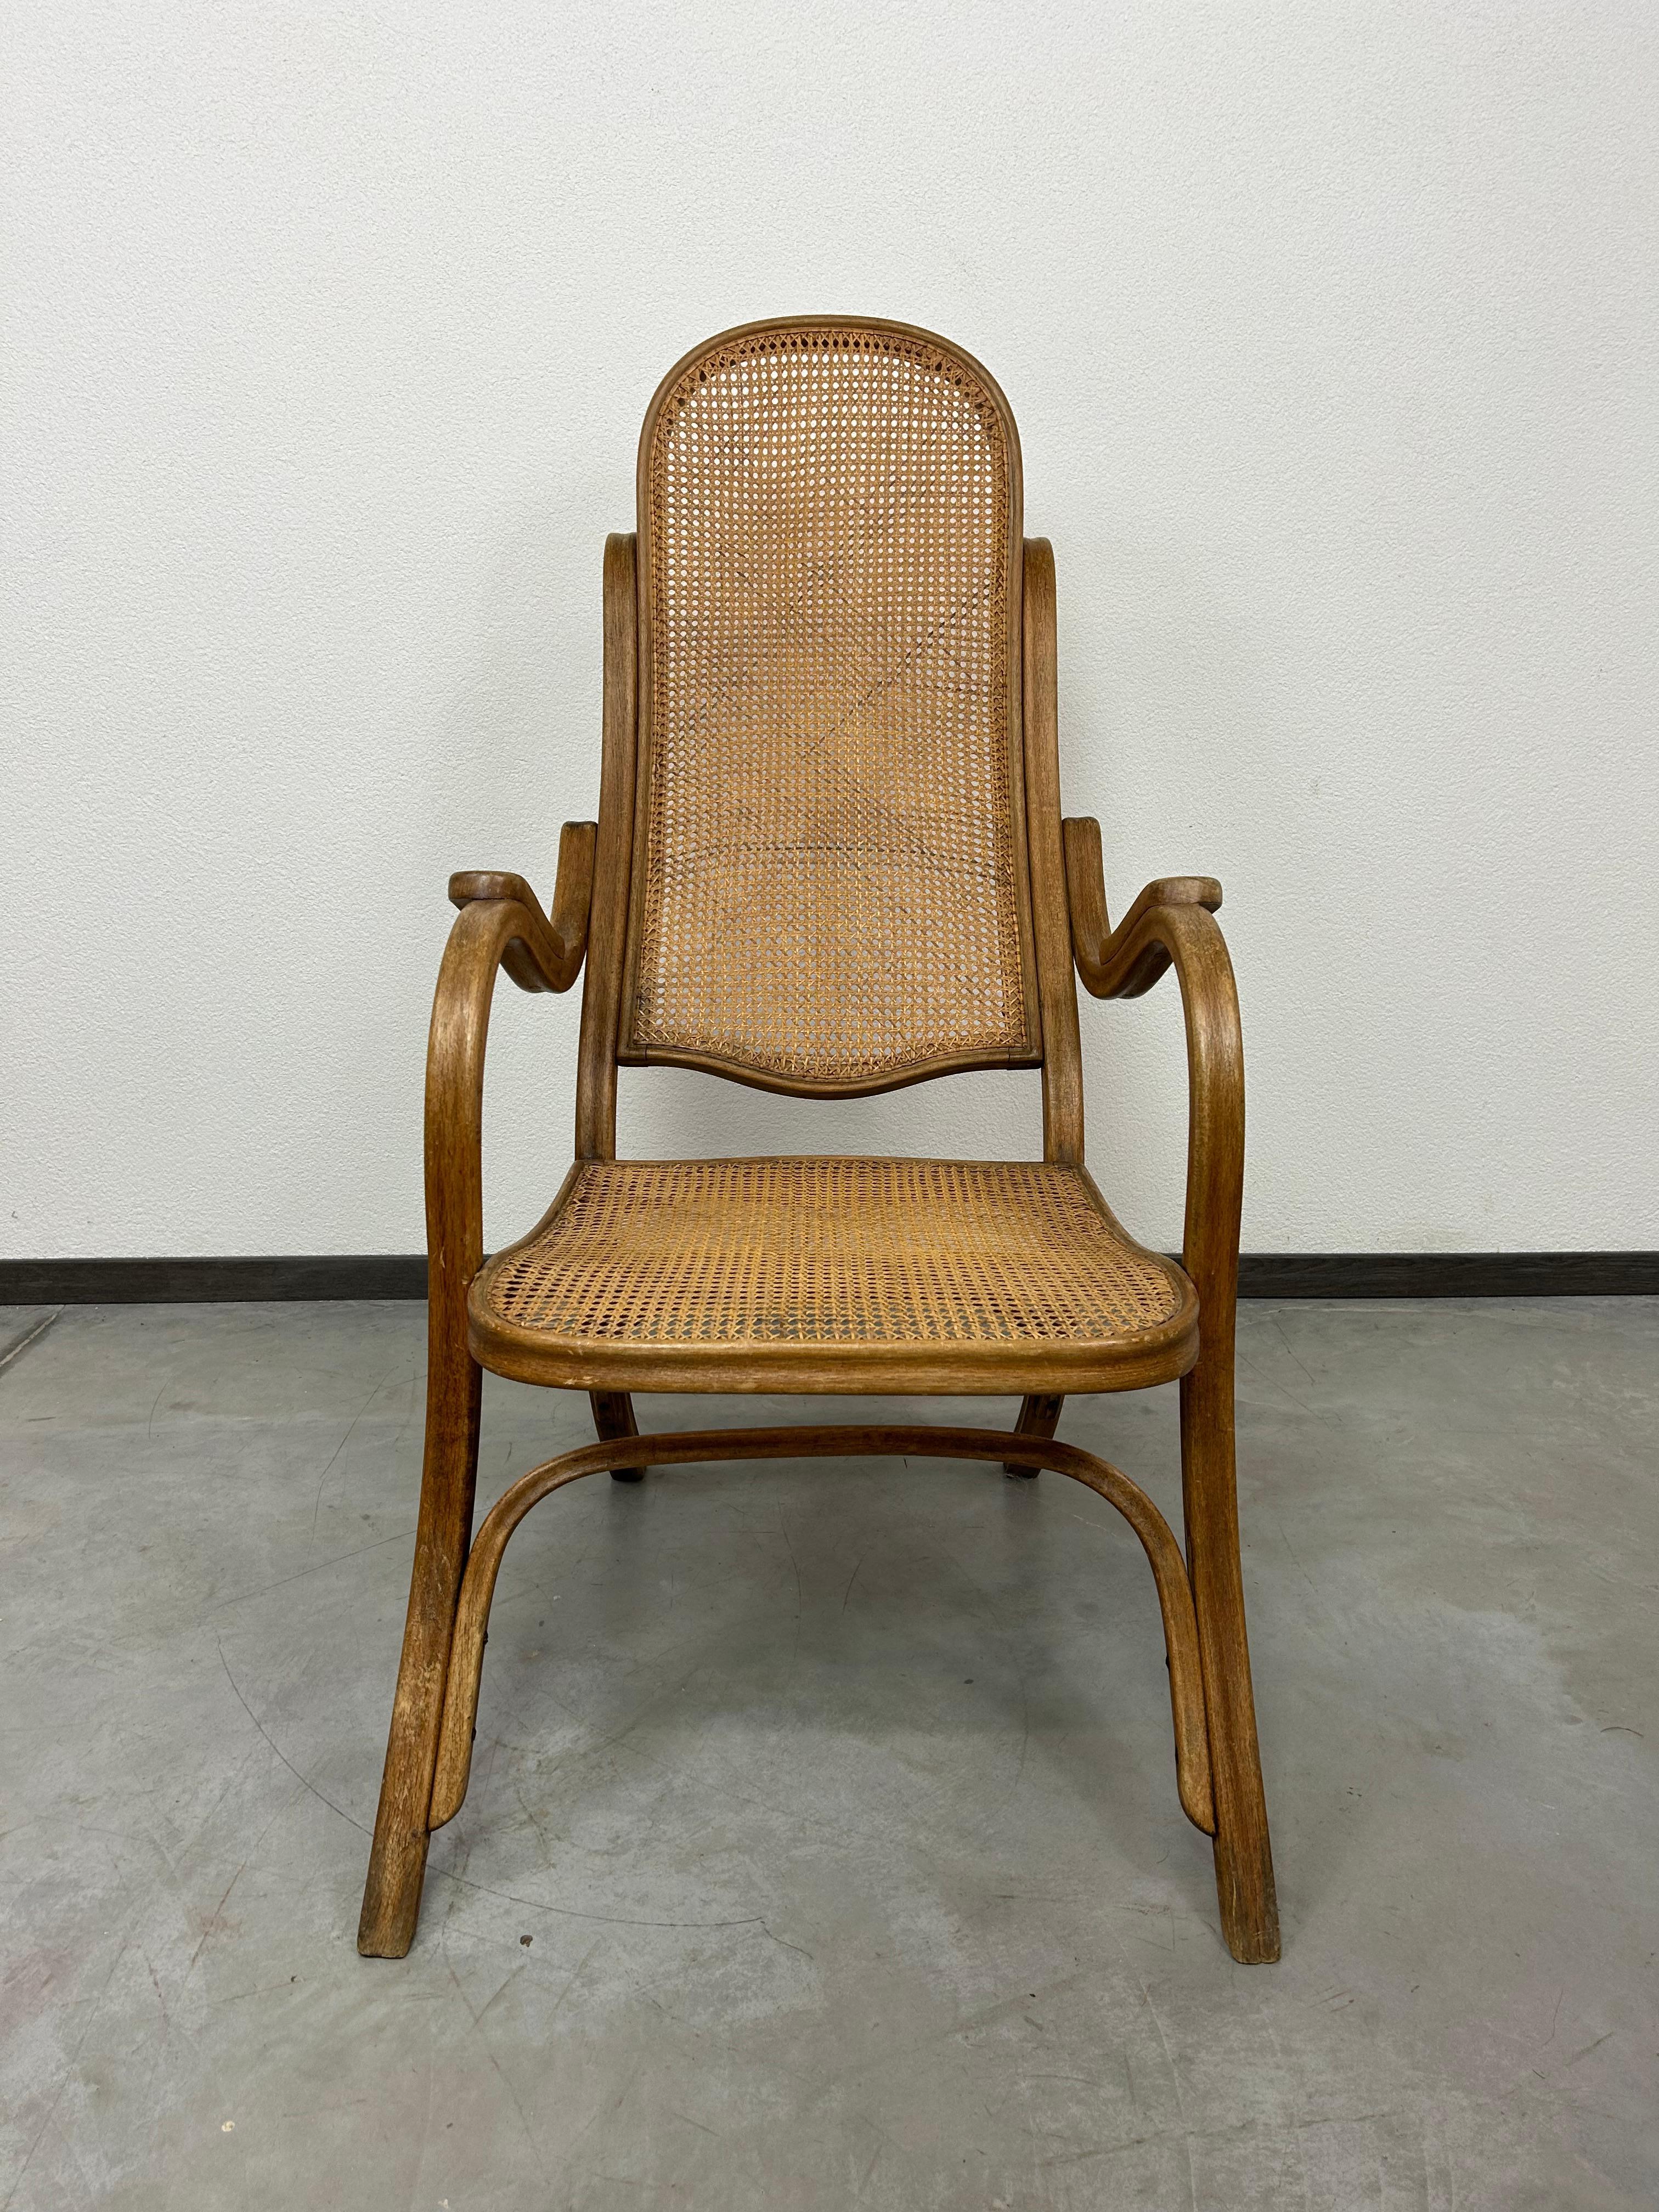 Rare easy armchair no.1 with rattan seat by Thonet in very nice original condition with signs of use.